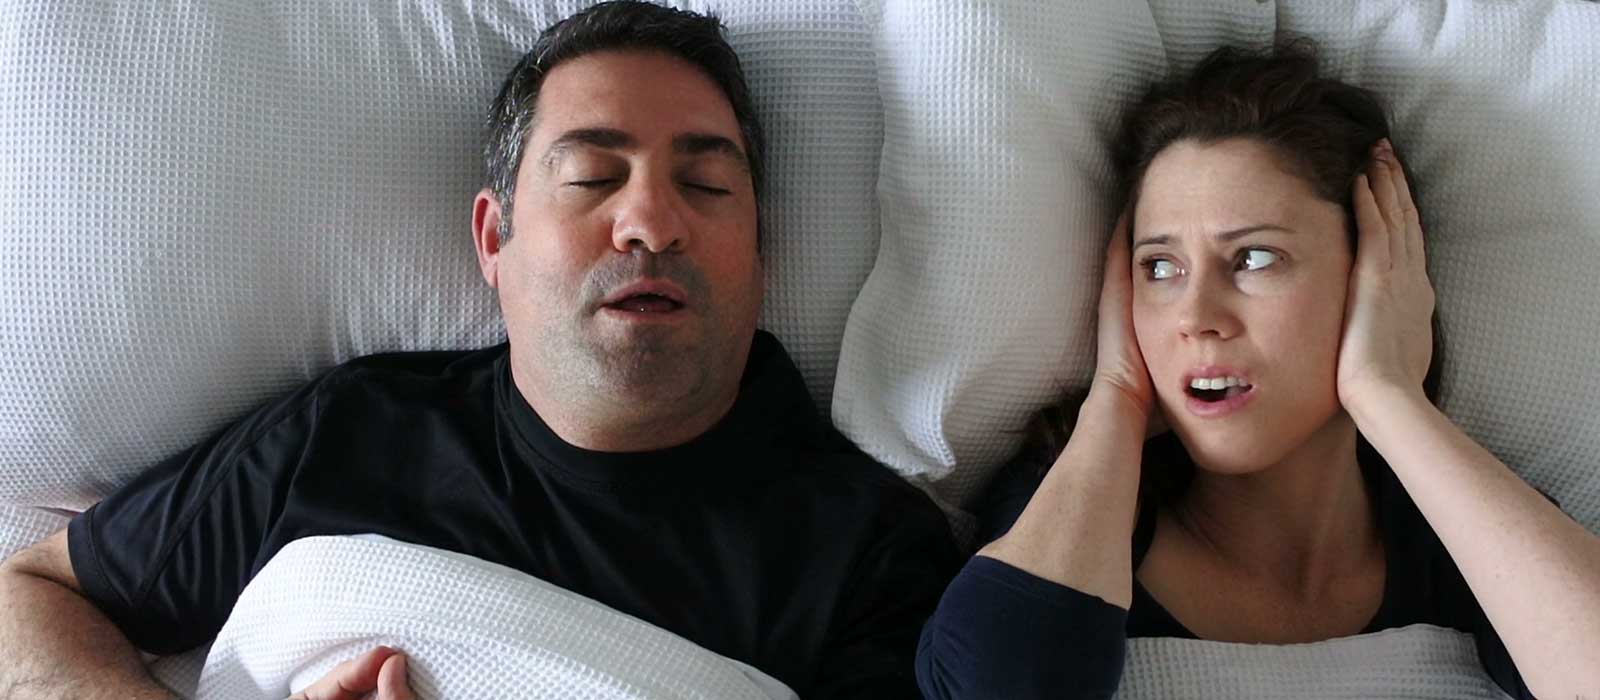 wife annoyed by husband's snoring